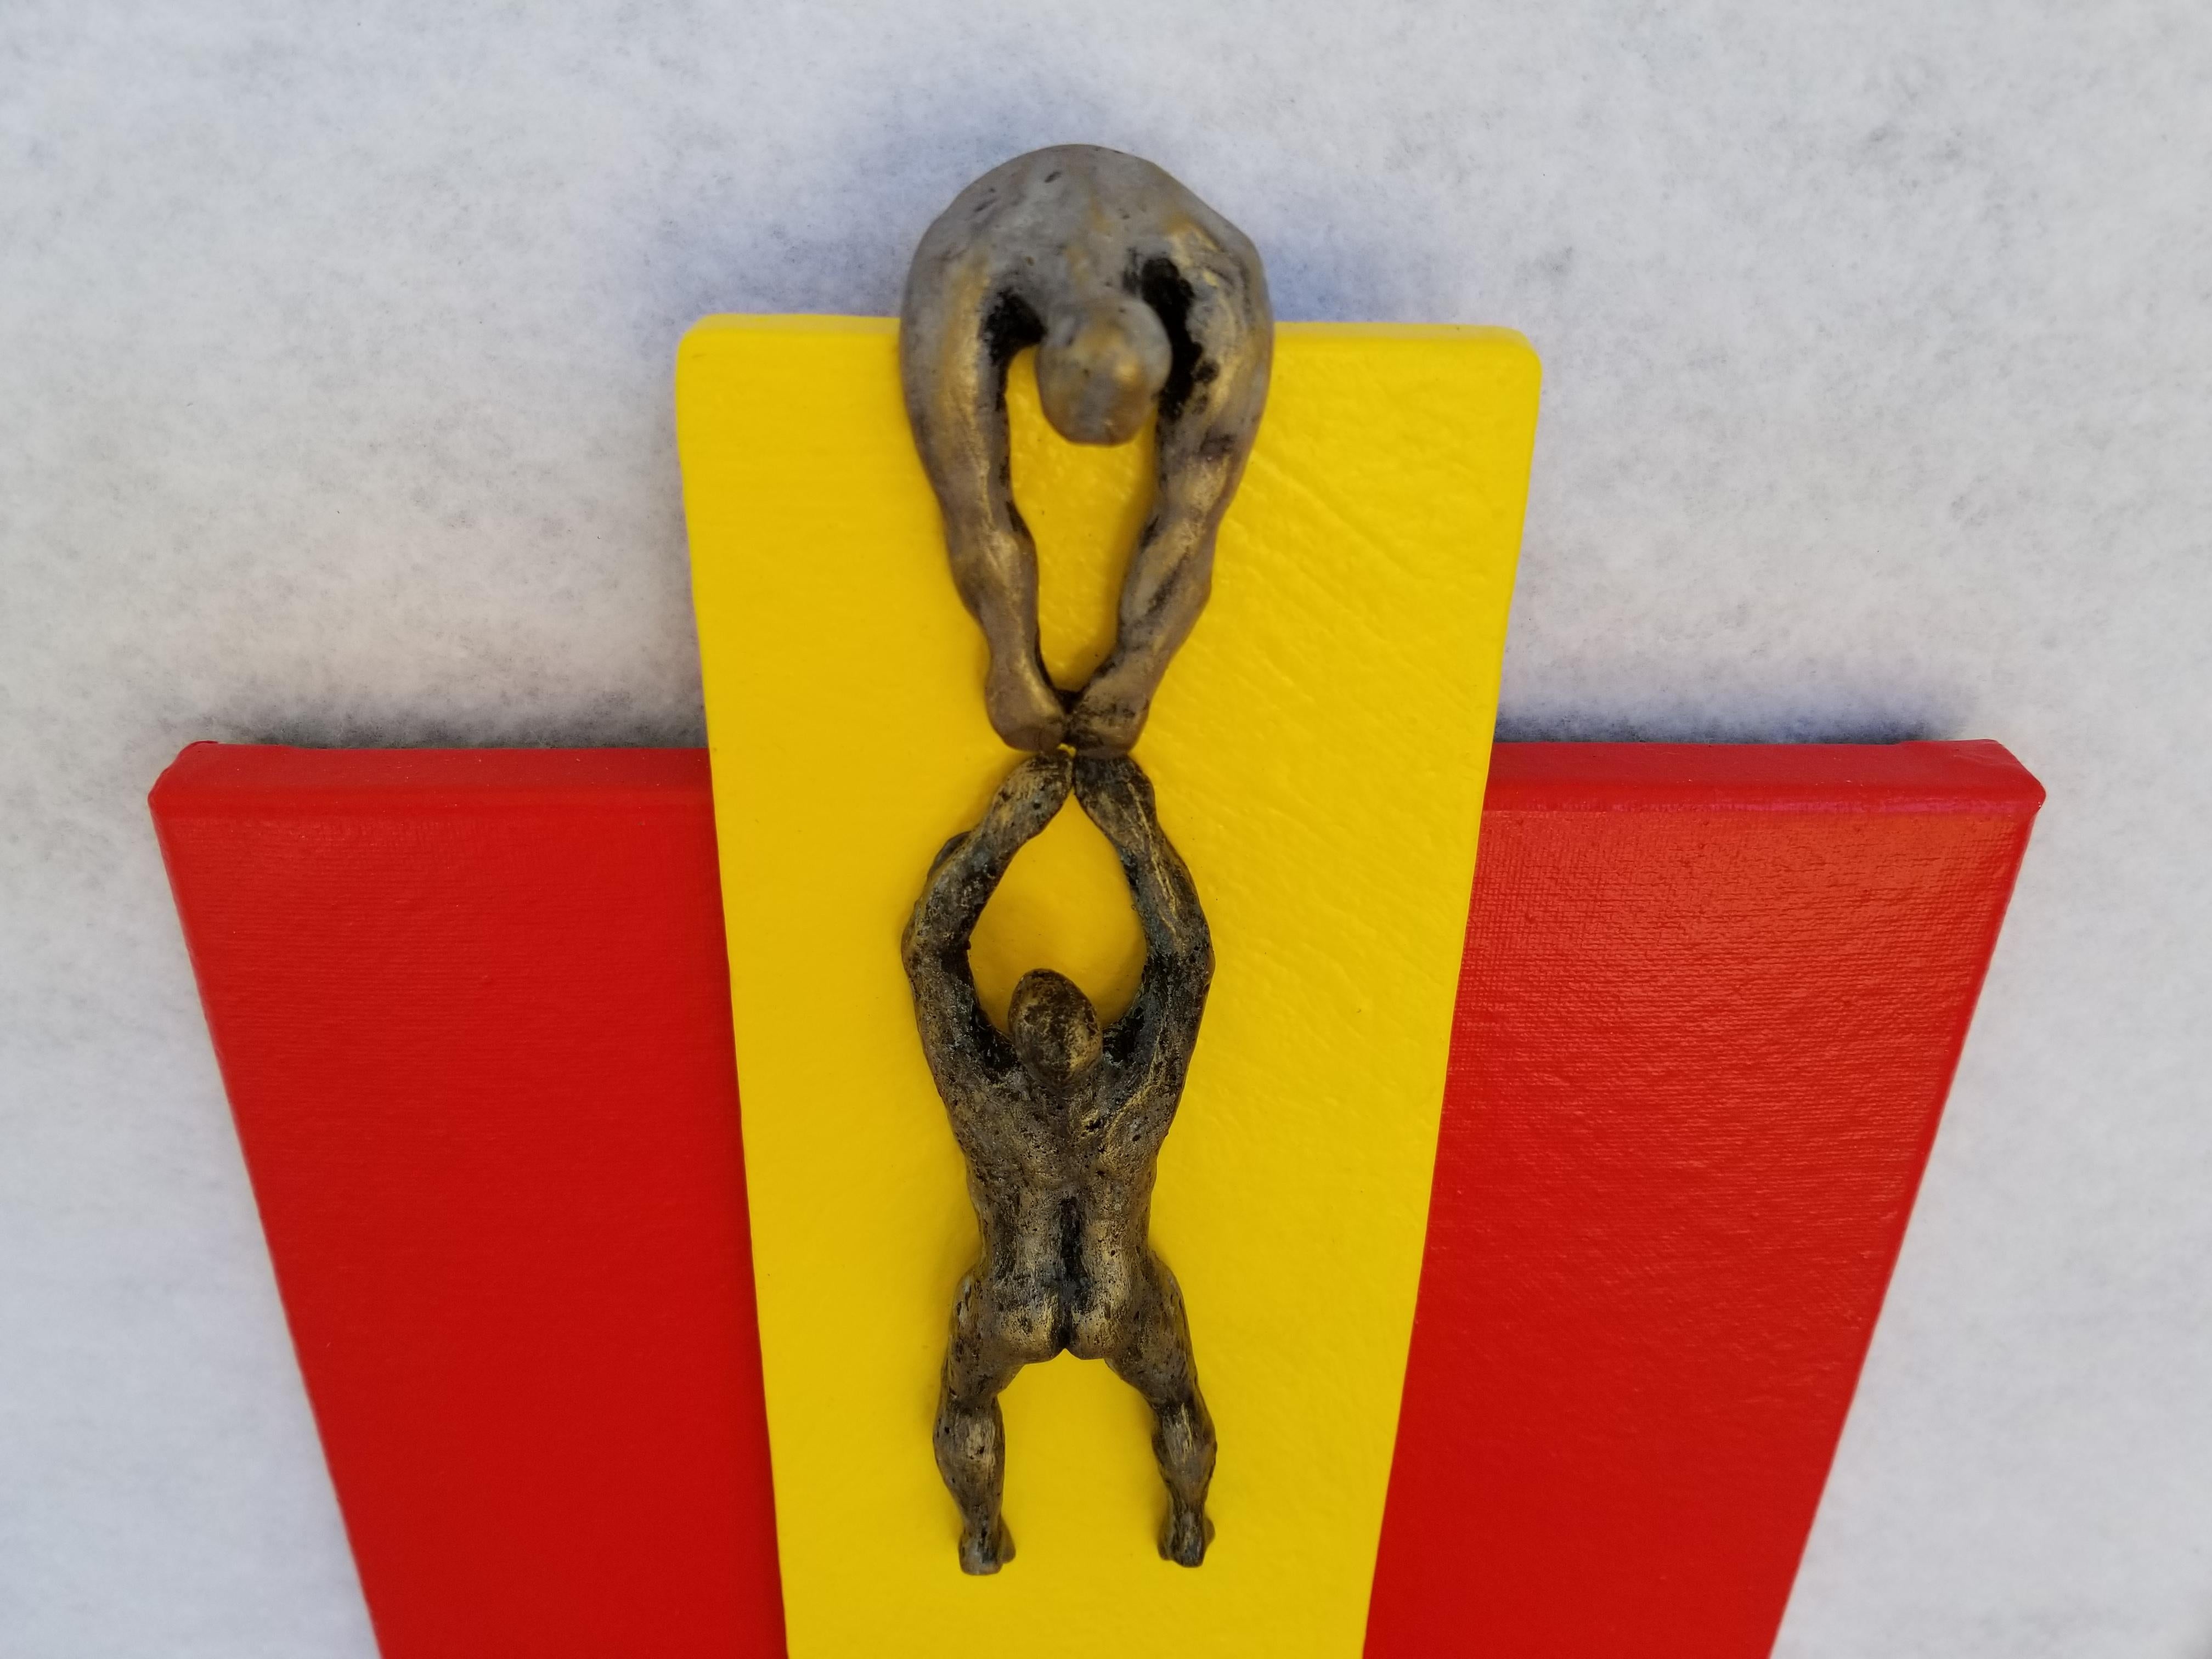 <p>Artist Comments<br>While preserving her aesthetic, artist Yelitza Diaz blends the minimalist with the modern. She displays a metallic figure dangling in the hands of another. She uses bold shades of red and yellow to color the structural